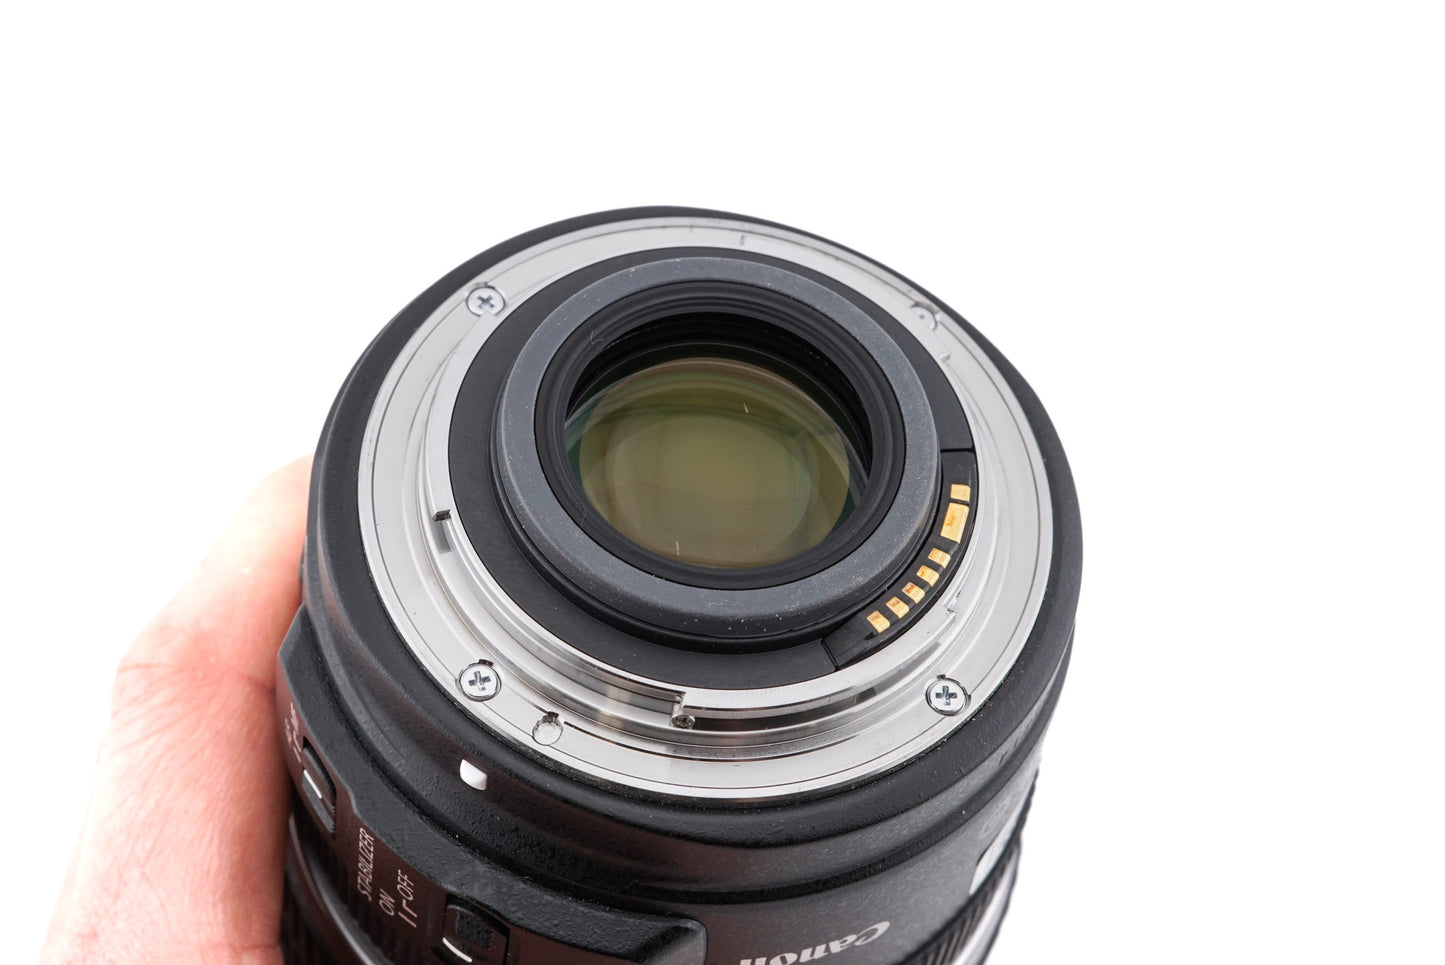 Canon 17-55mm f2.8 IS USM